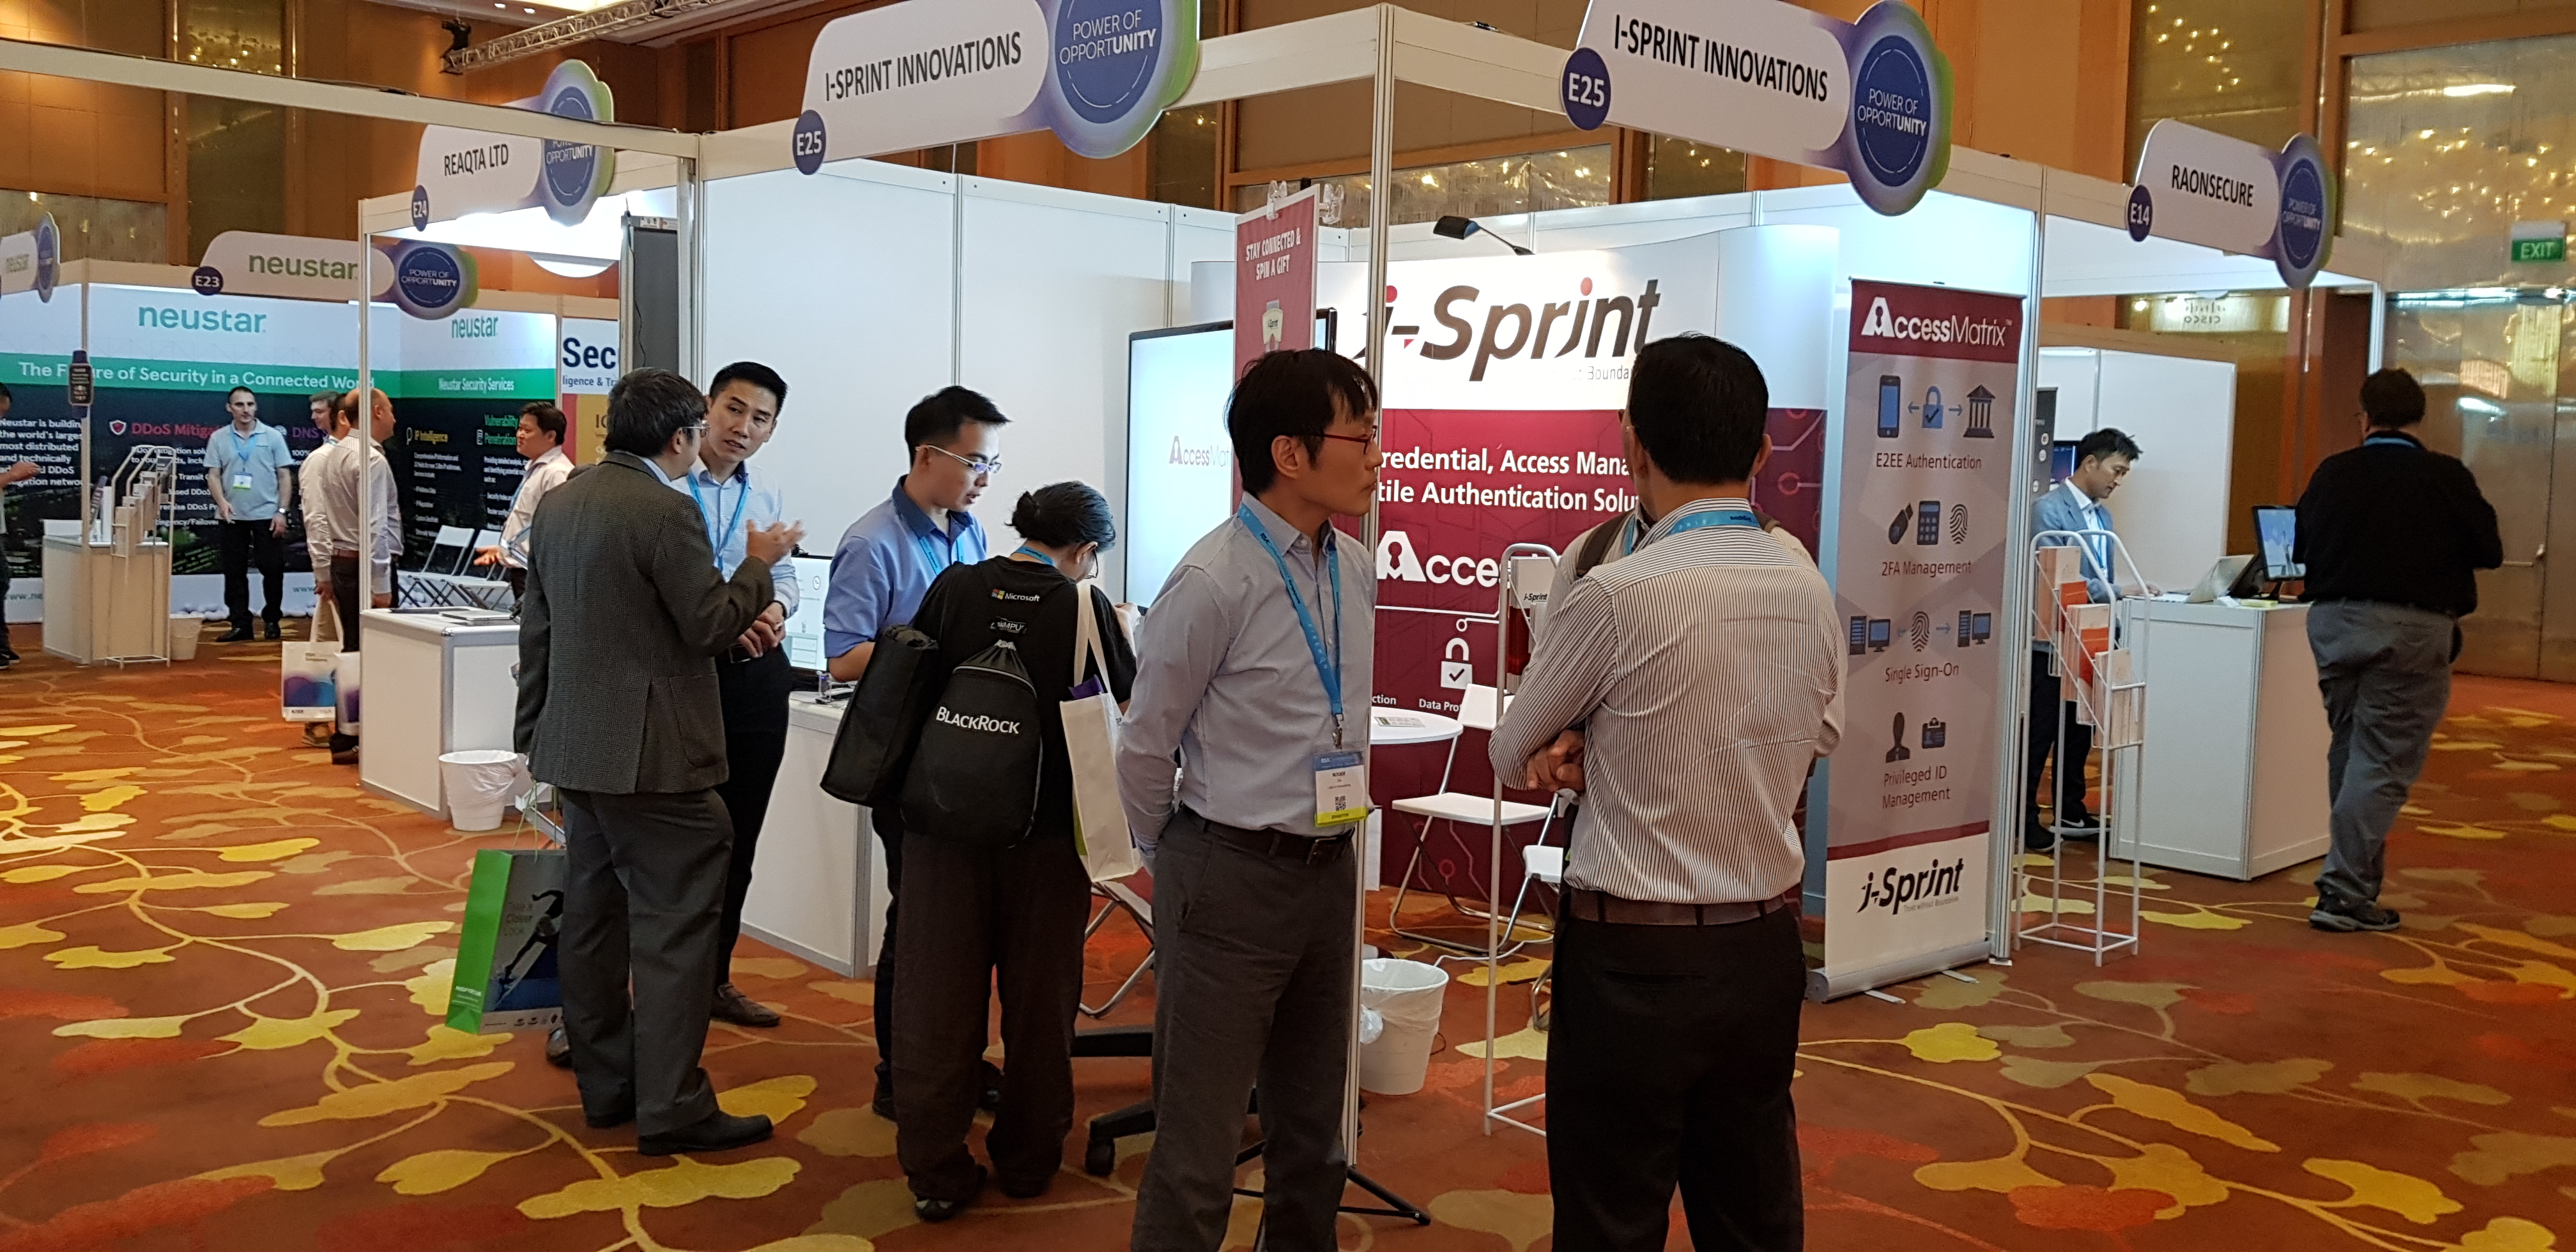 i-Sprint RSA 2017 Conference Booth